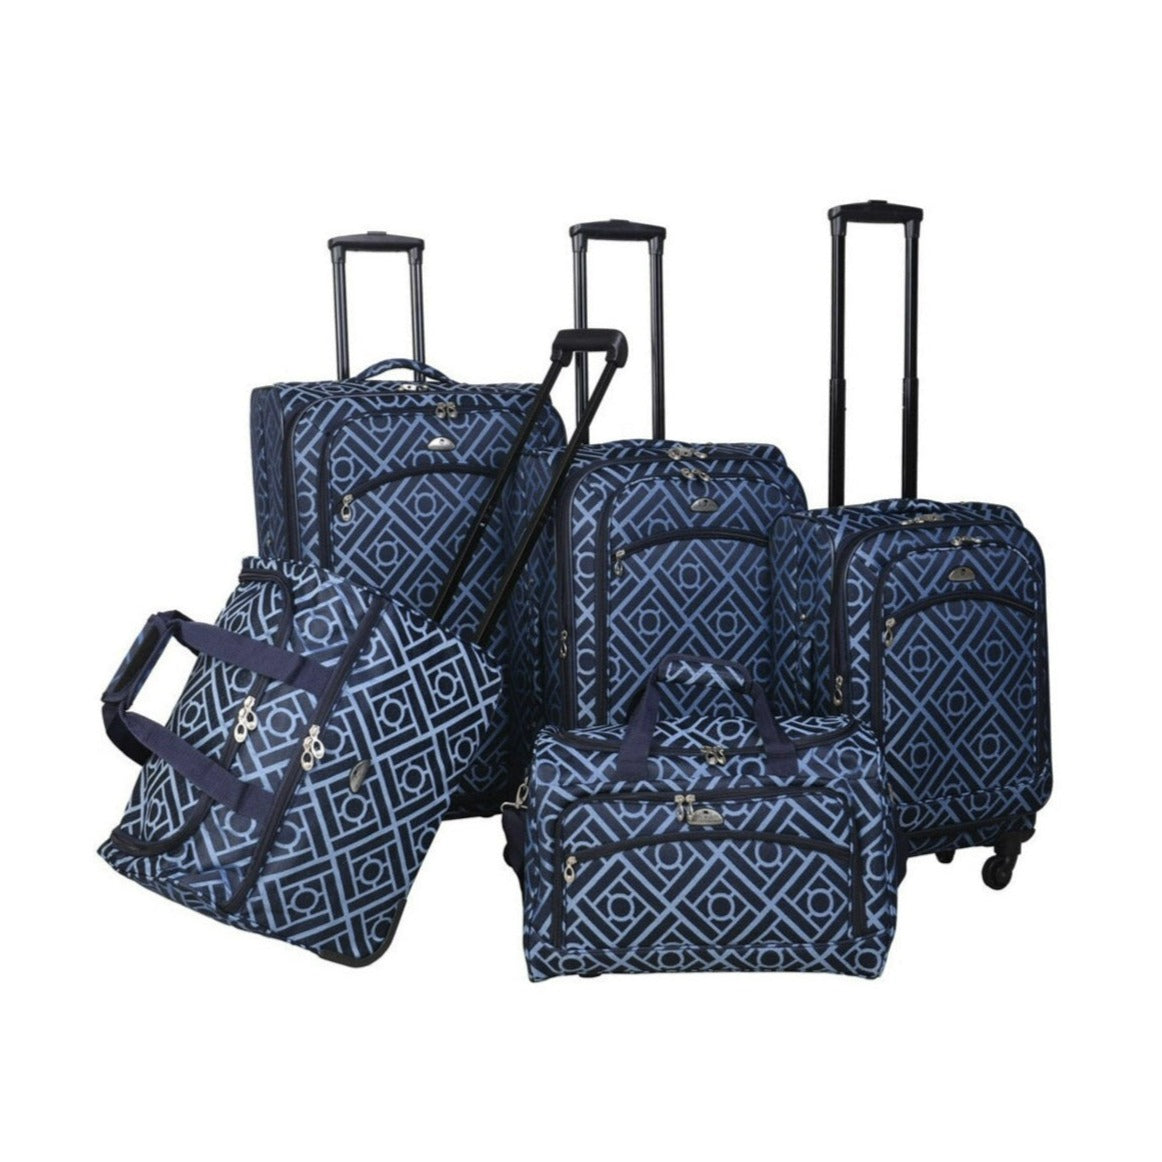 American Flyer Astor Collection 5-Piece Spinner Luggage Set